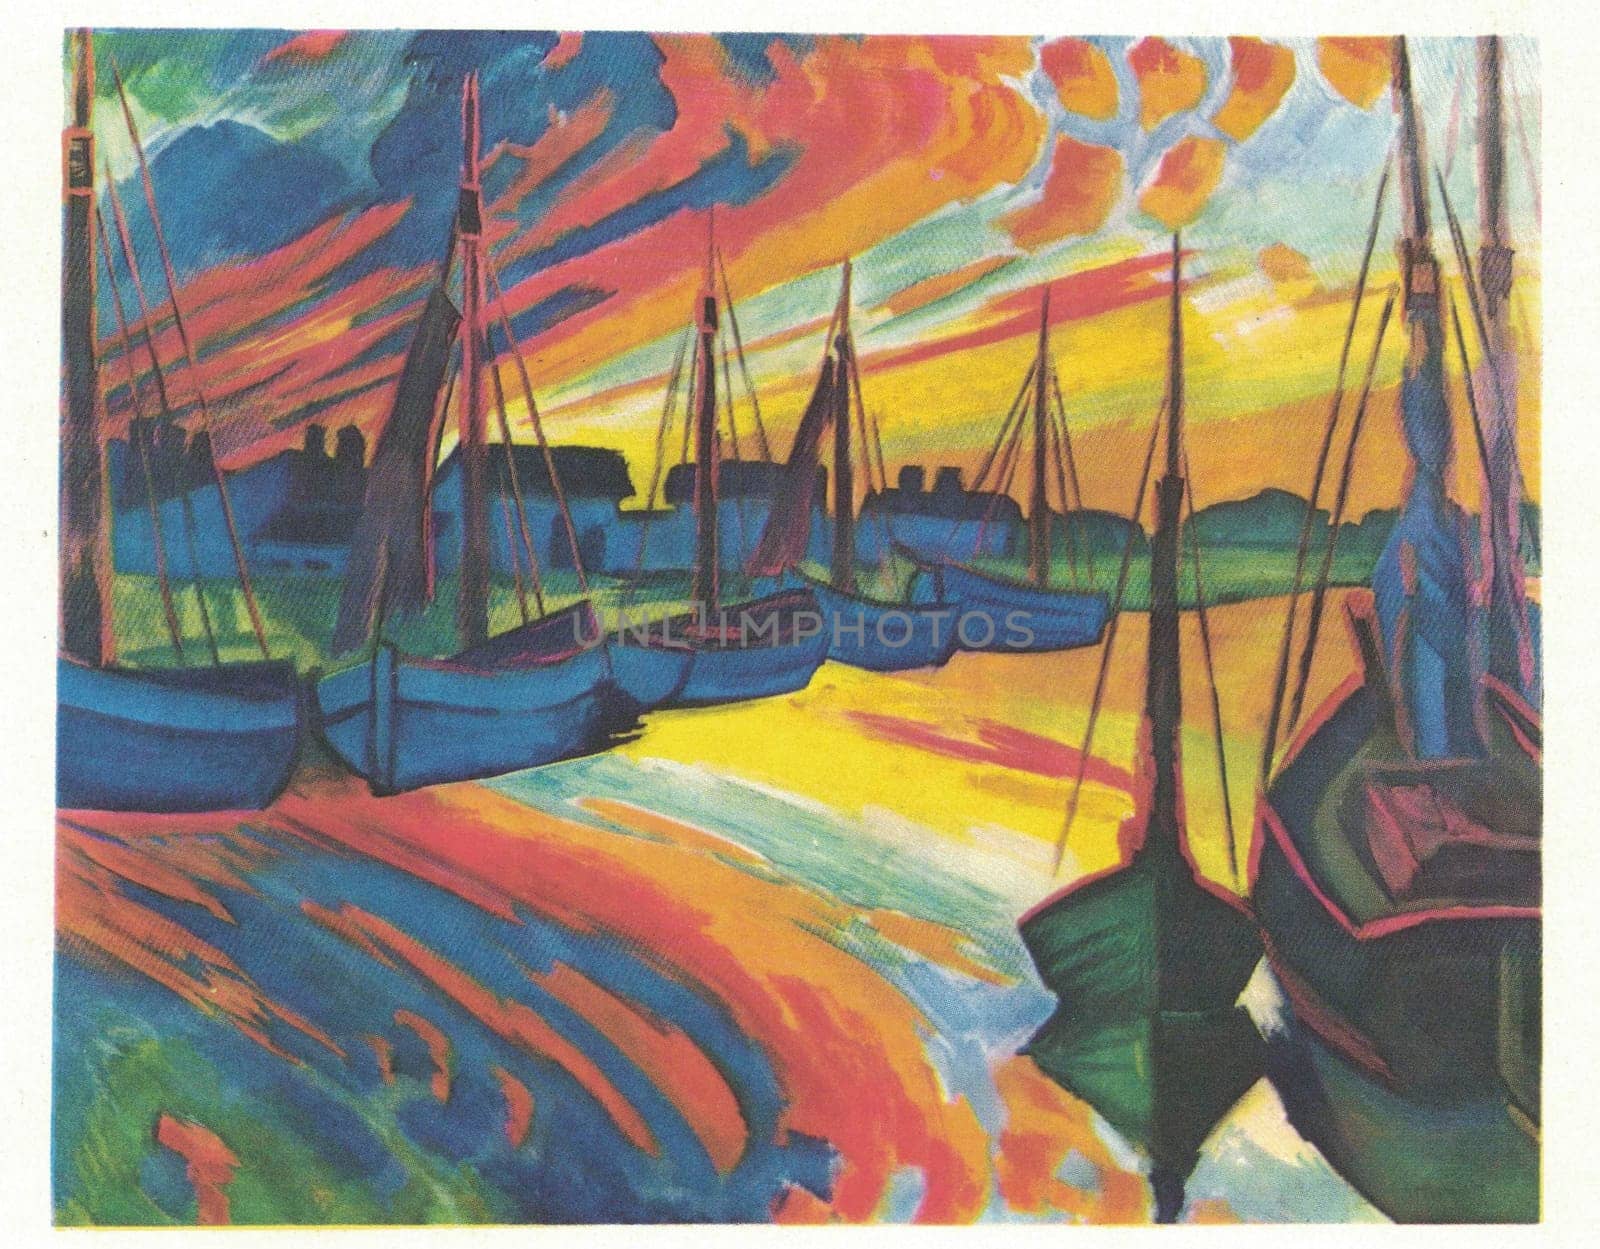 Max Pechstein, Port of Leba (Hafen von Leba), 1922, oil on canvas. Painting by Max Pechstein. Max Pechstein is considered today, as he was then, one of the most important representatives of German Expressionism. In spring 1906, he joined the artists' group "Die Brücke", which had been founded the previous year by Kirchner, Heckel, Schmidt-Rottluff and Bleyl. In the field of graphic art, he produced an oeuvre of over 850 woodcuts, lithographs and etchings in addition to his paintings